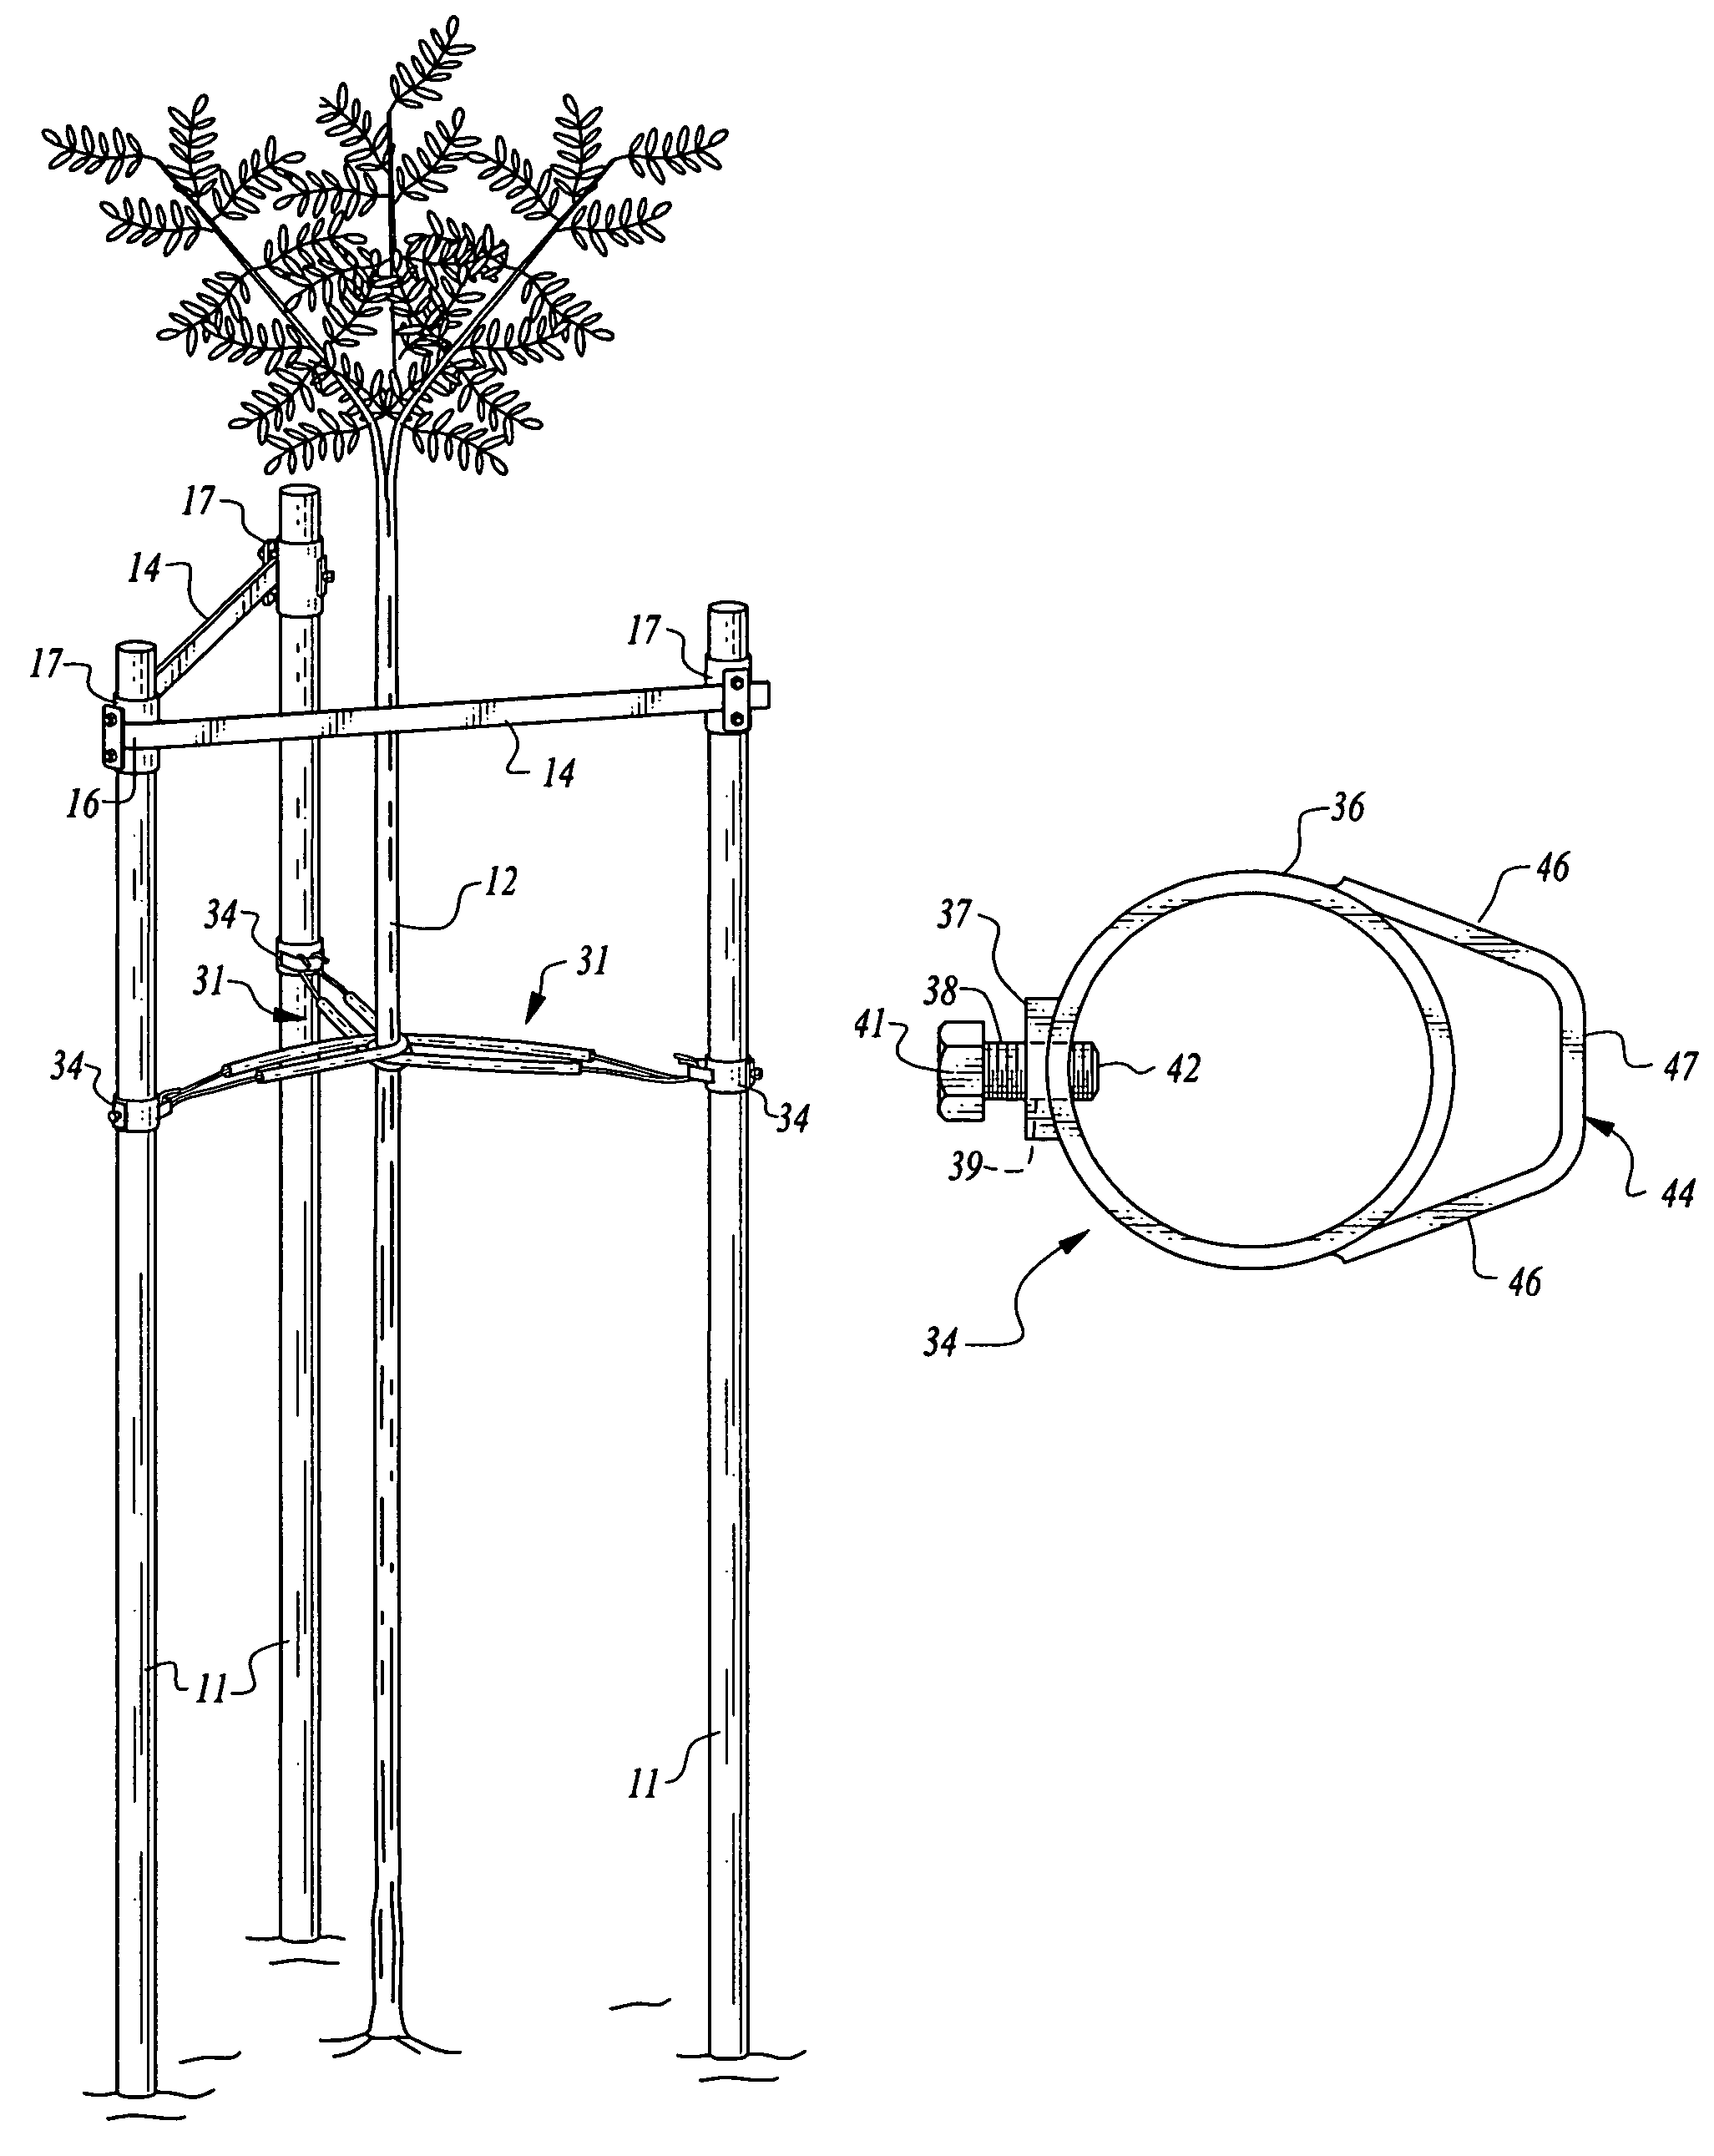 Apparatus for staking trees